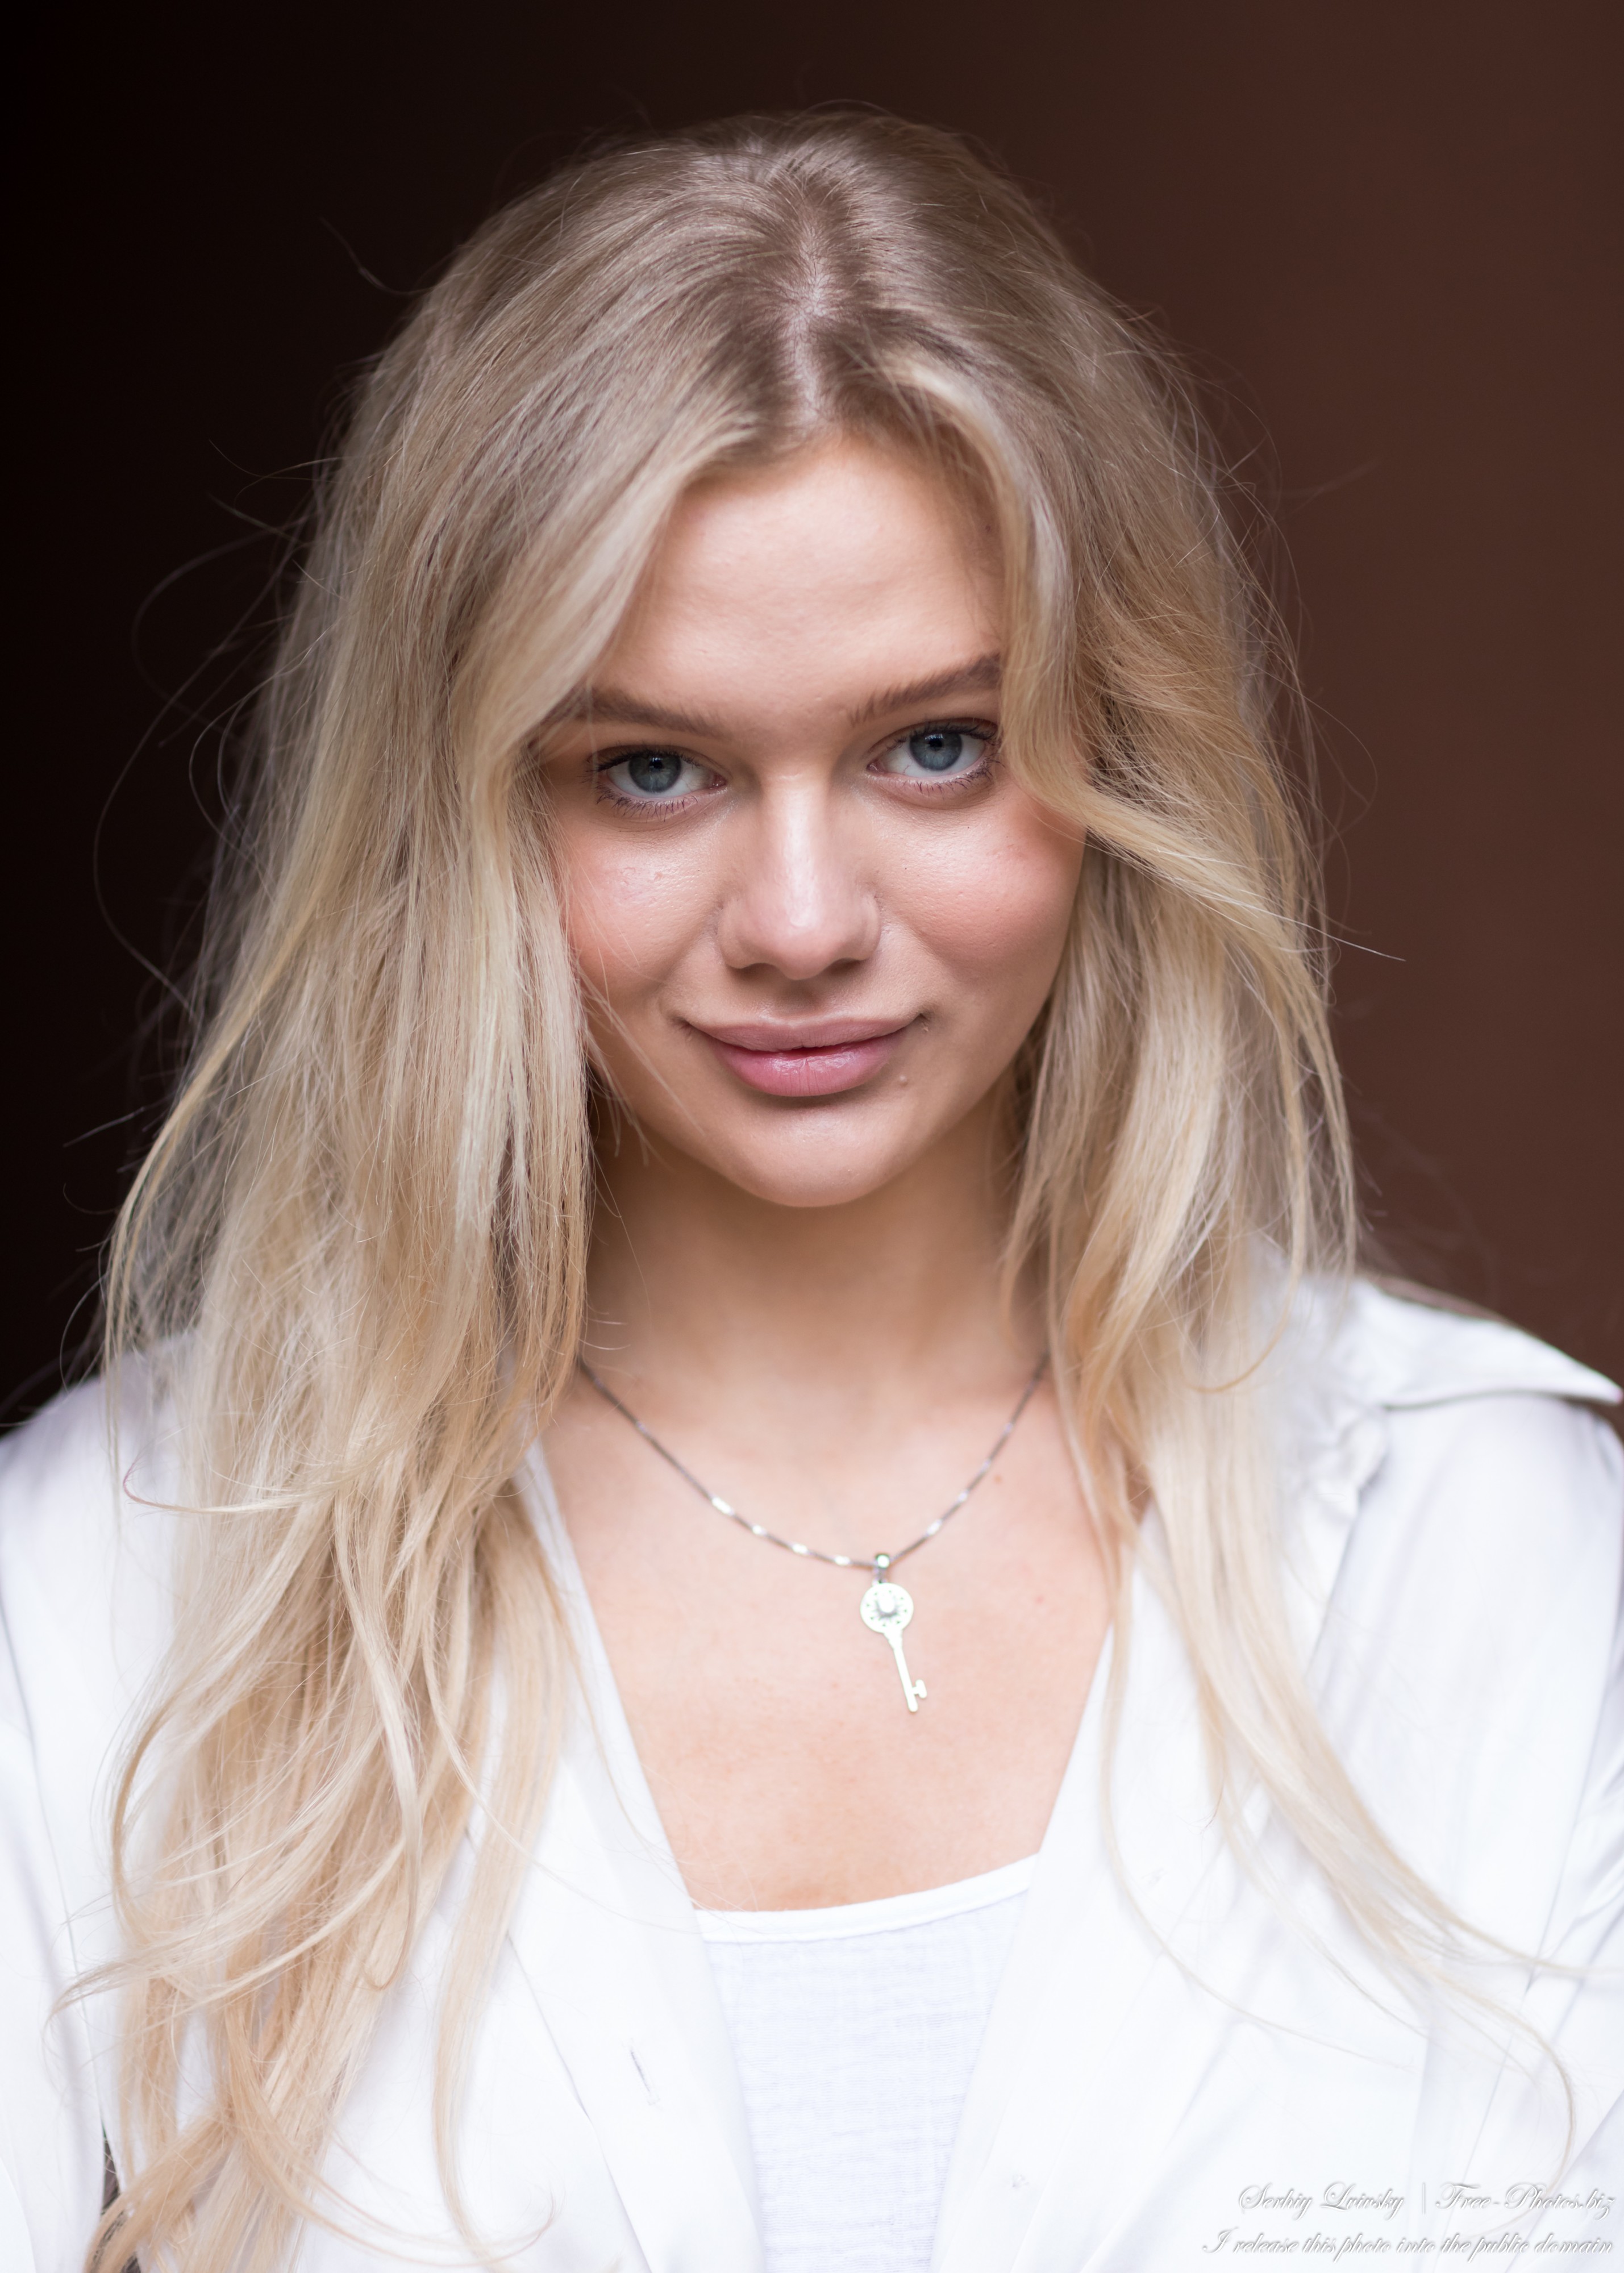 Oksana - a natural blonde 19-year-old girl photographed in July 2021 by Serhiy Lvivsky, picture 20